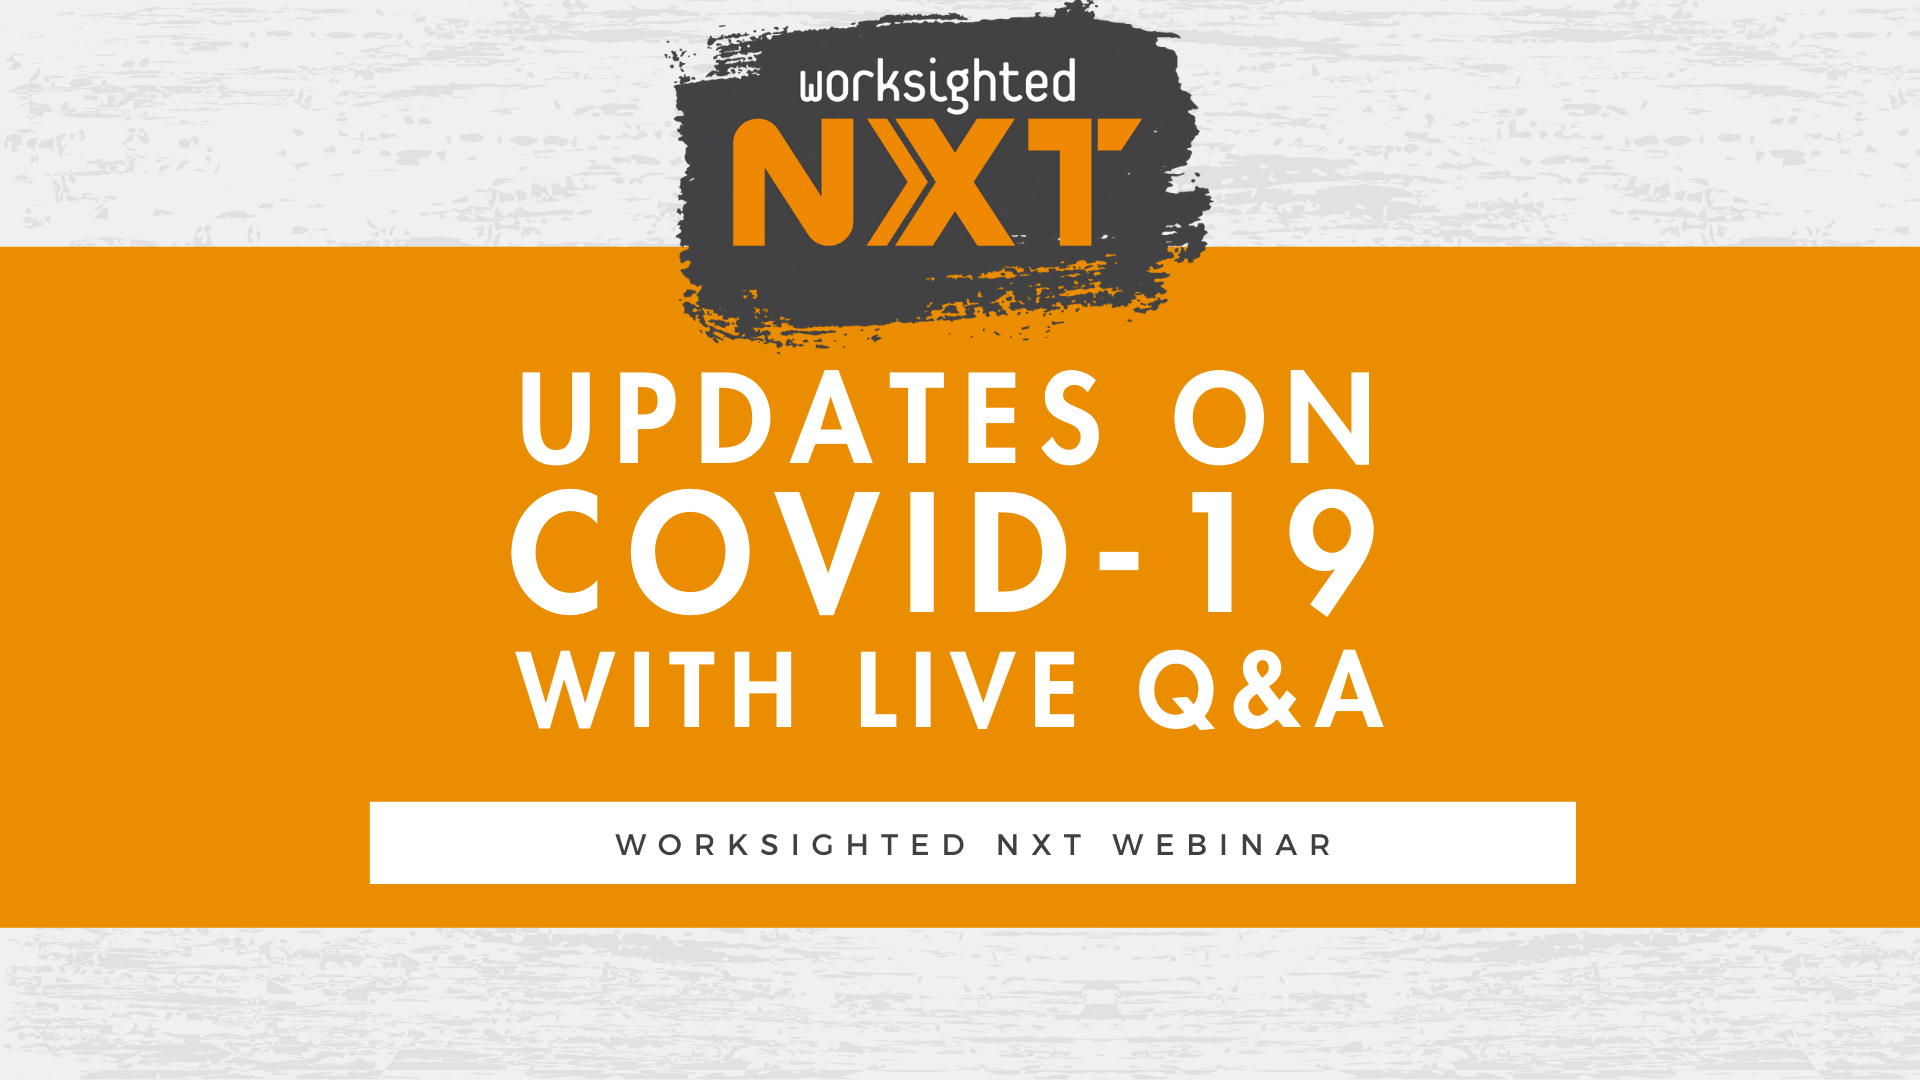 Worksighted NXT Webinar |  Updates on COVID-19 with Live Q&A